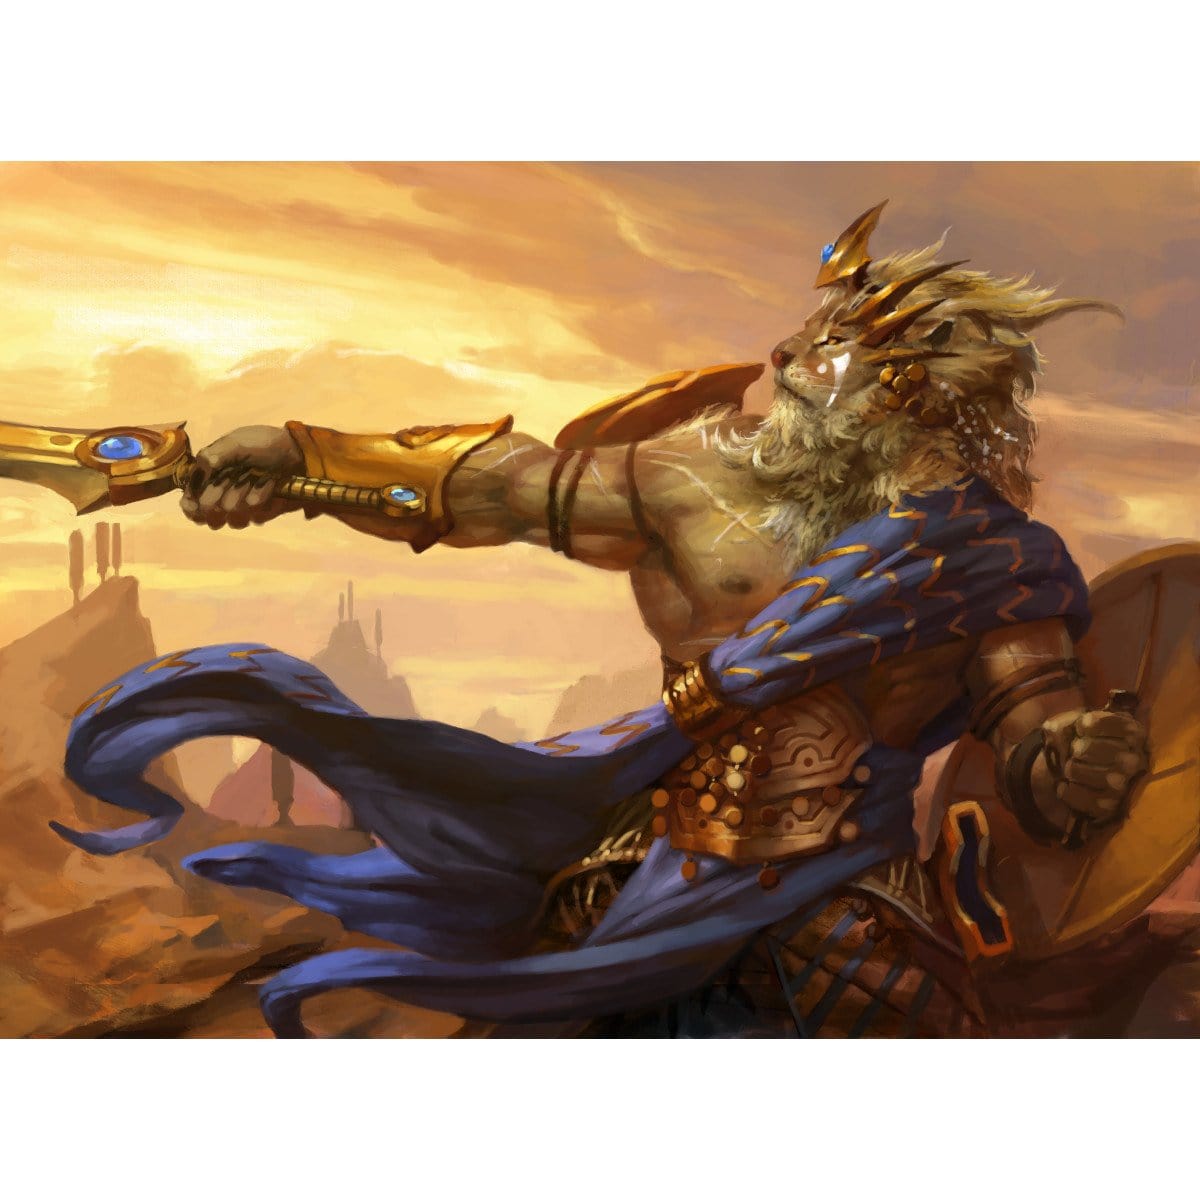 Brimaz, King of Oreskos Print - Print - Original Magic Art - Accessories for Magic the Gathering and other card games